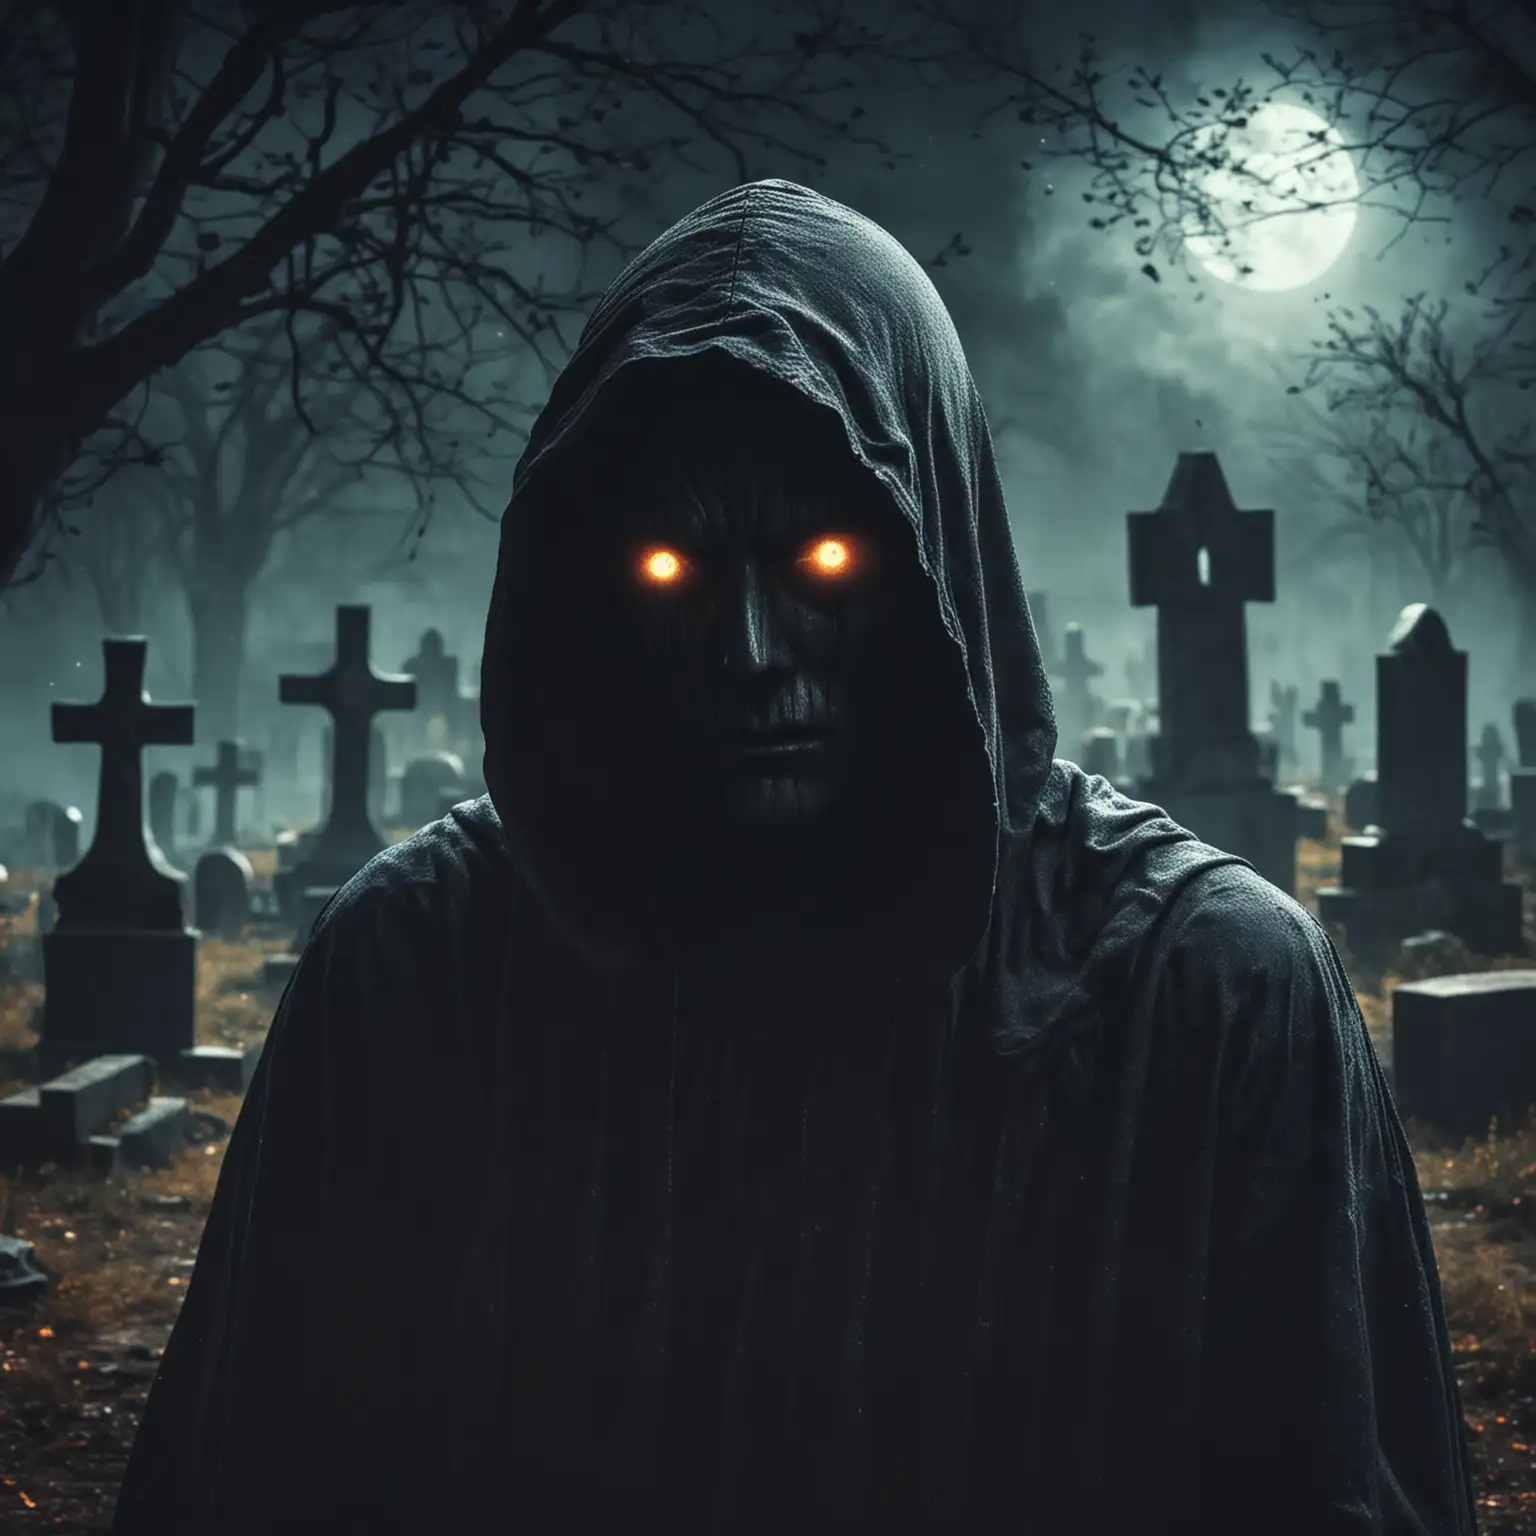 Enigmatic Hooded Figure with Glowing Eyes in a Haunted Graveyard